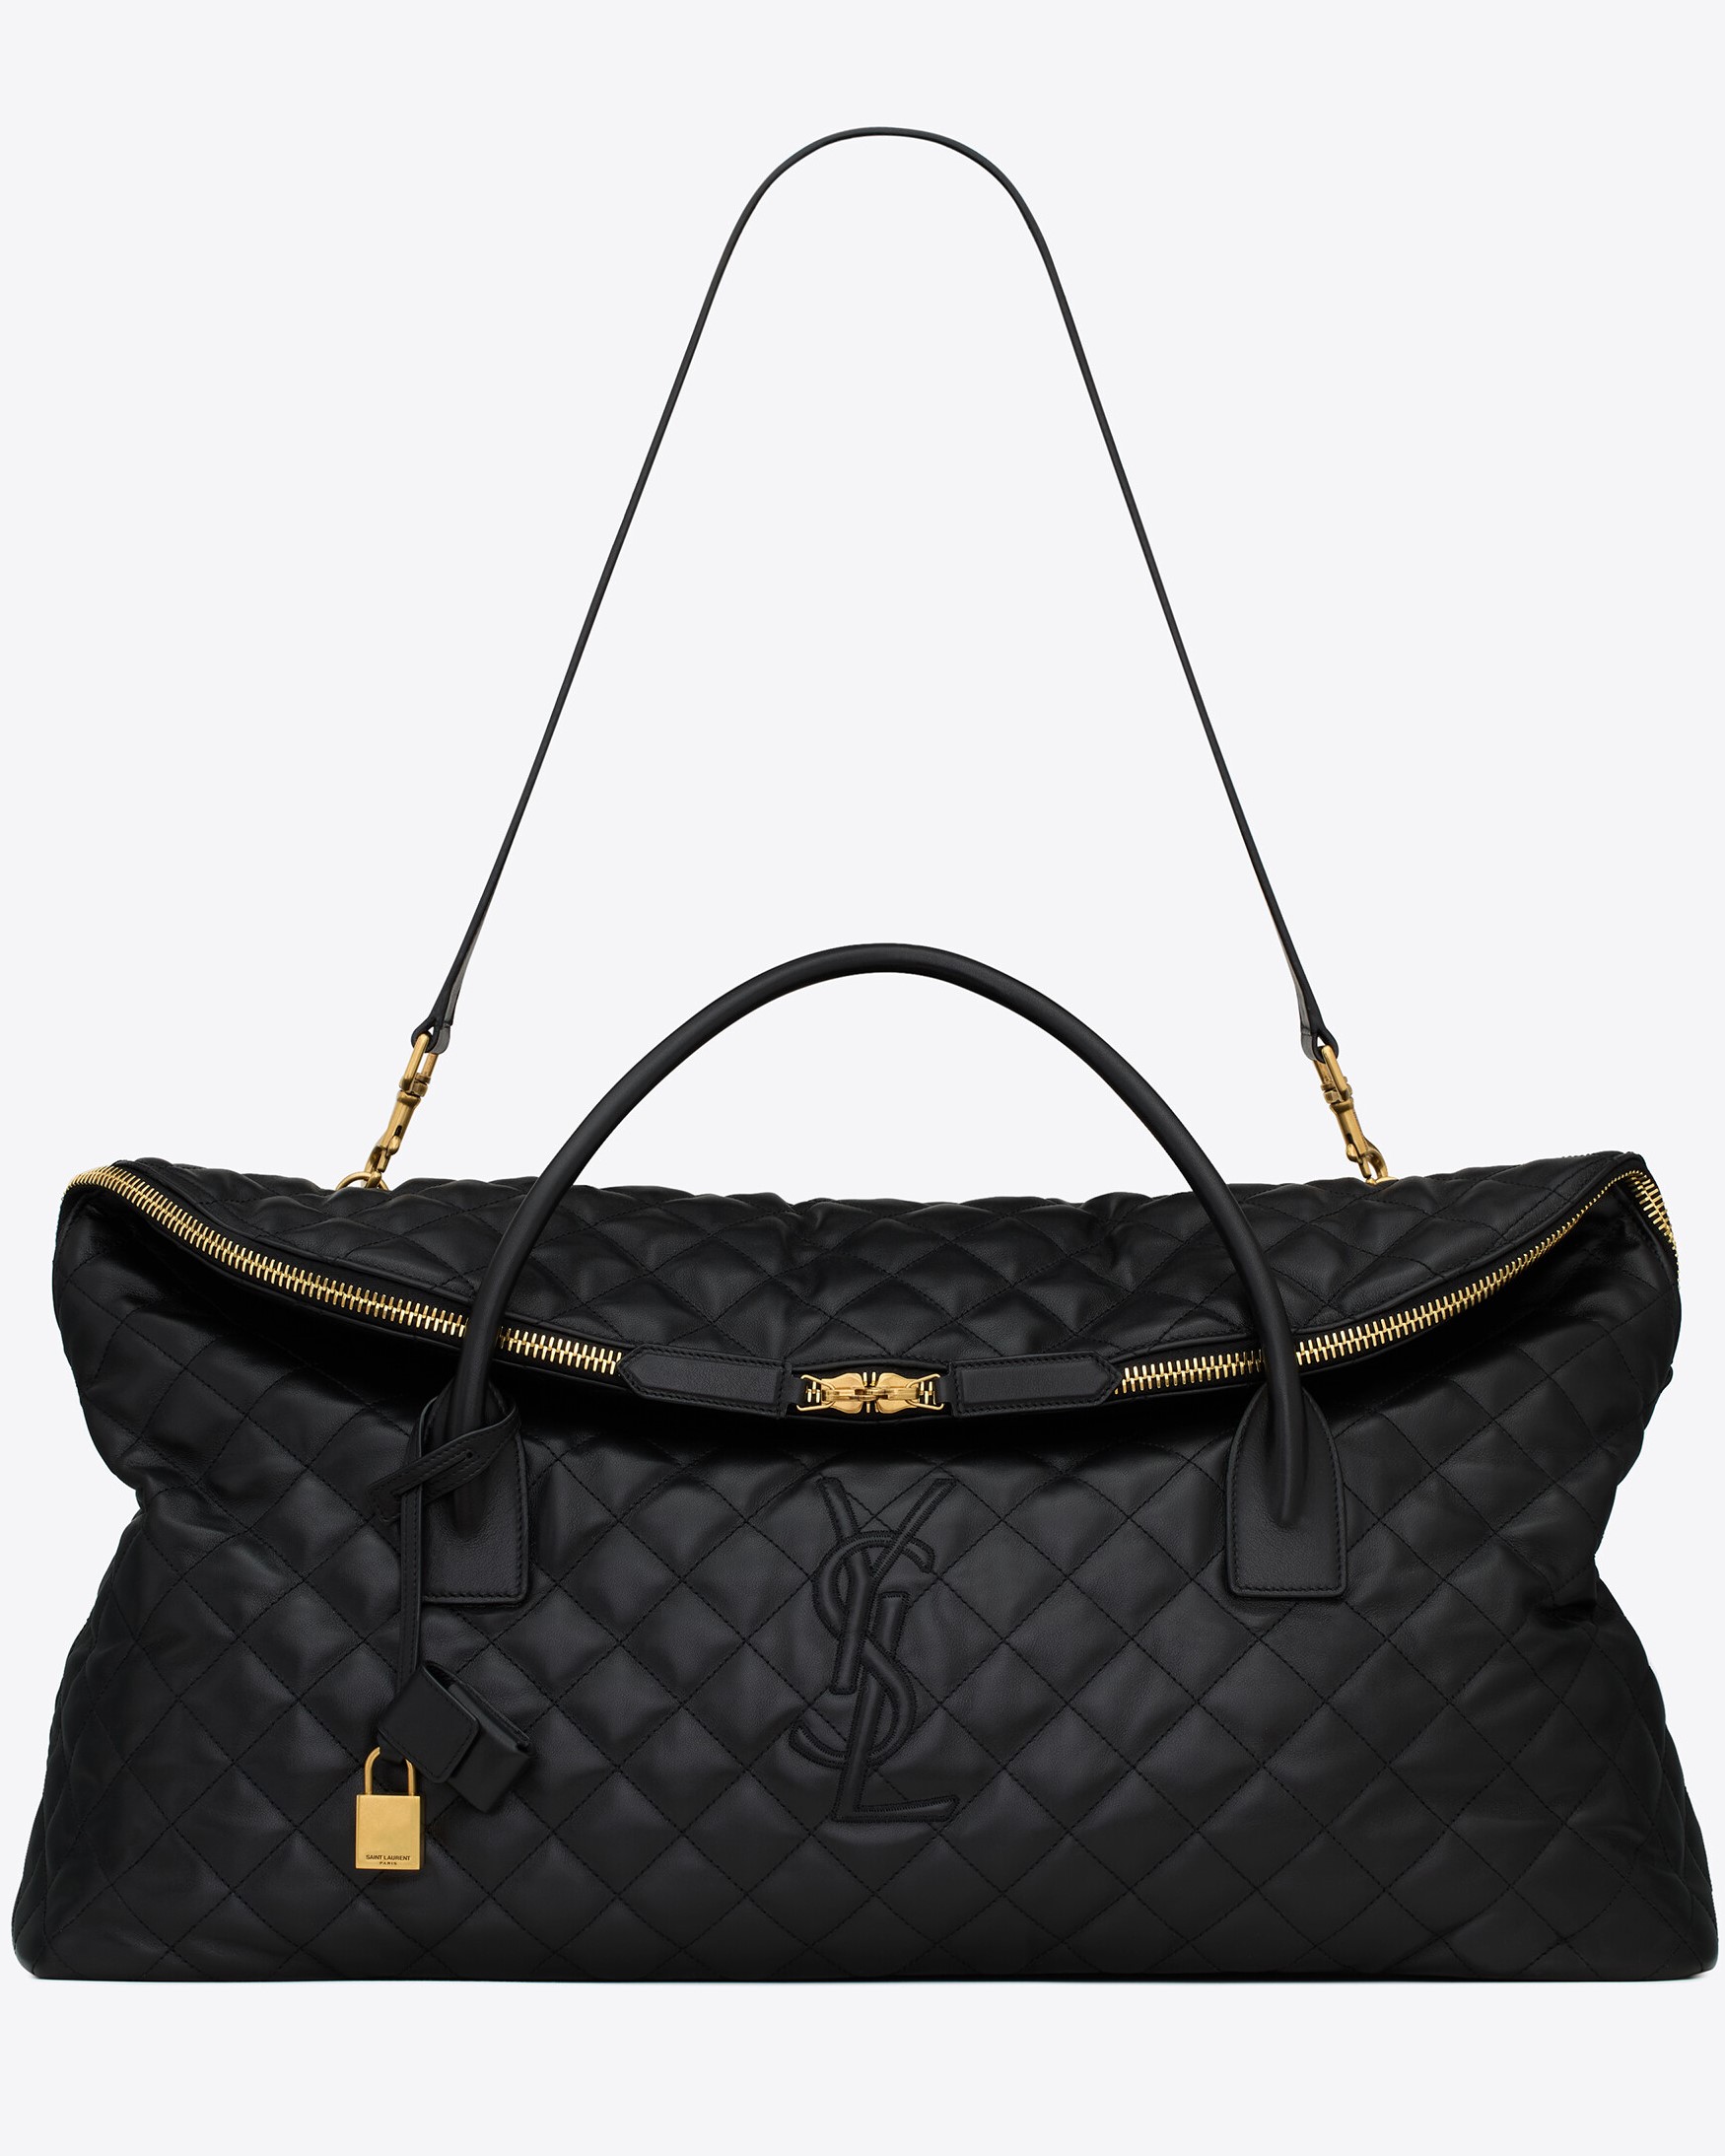 TÚI XÁCH DU LỊCH YSL ES GIANT TRAVEL BAG IN QUILTED LEATHER 7